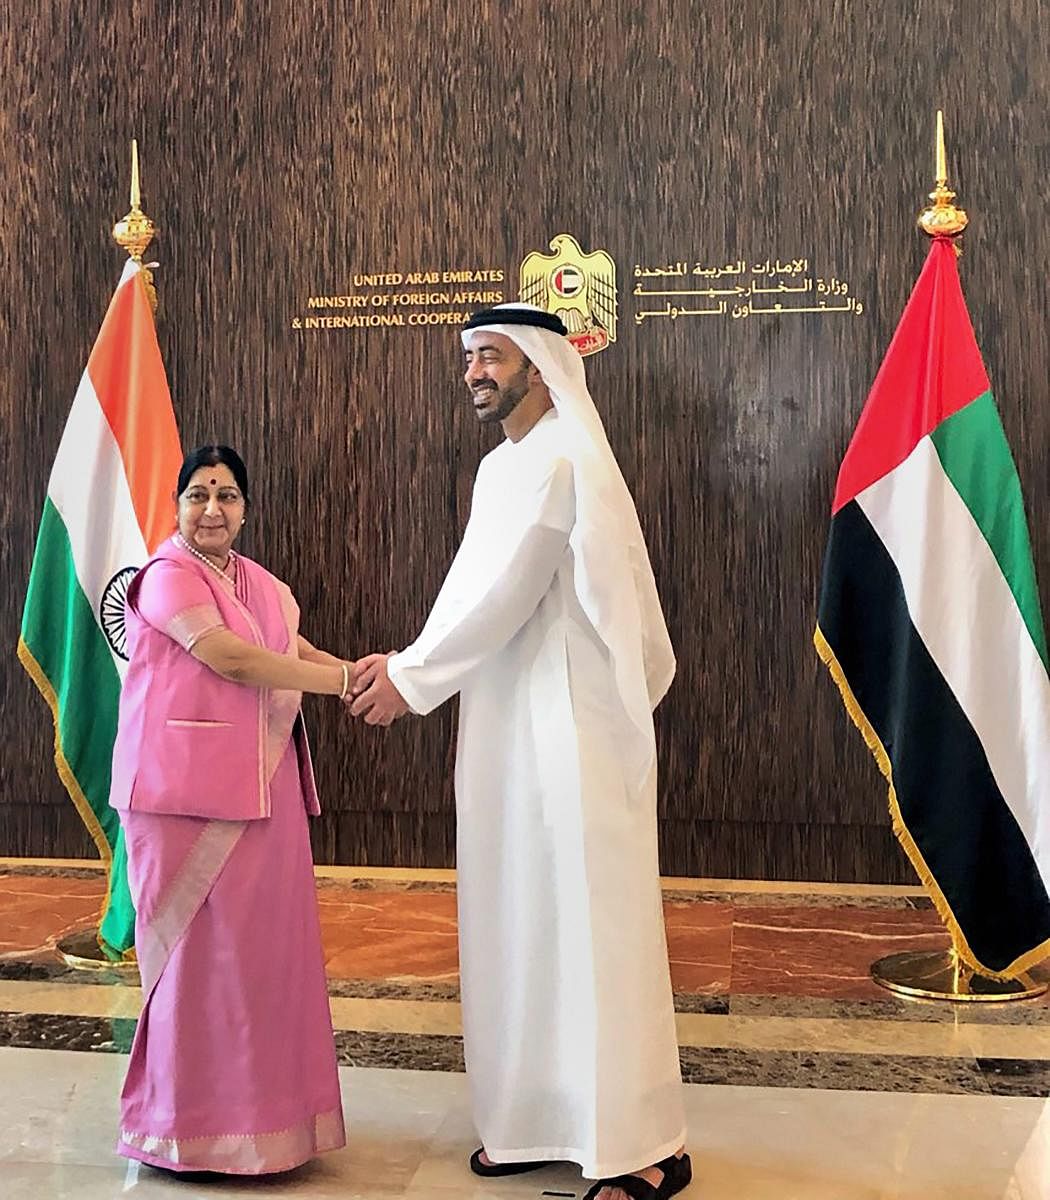 India ties up with UAE for Africa development projects